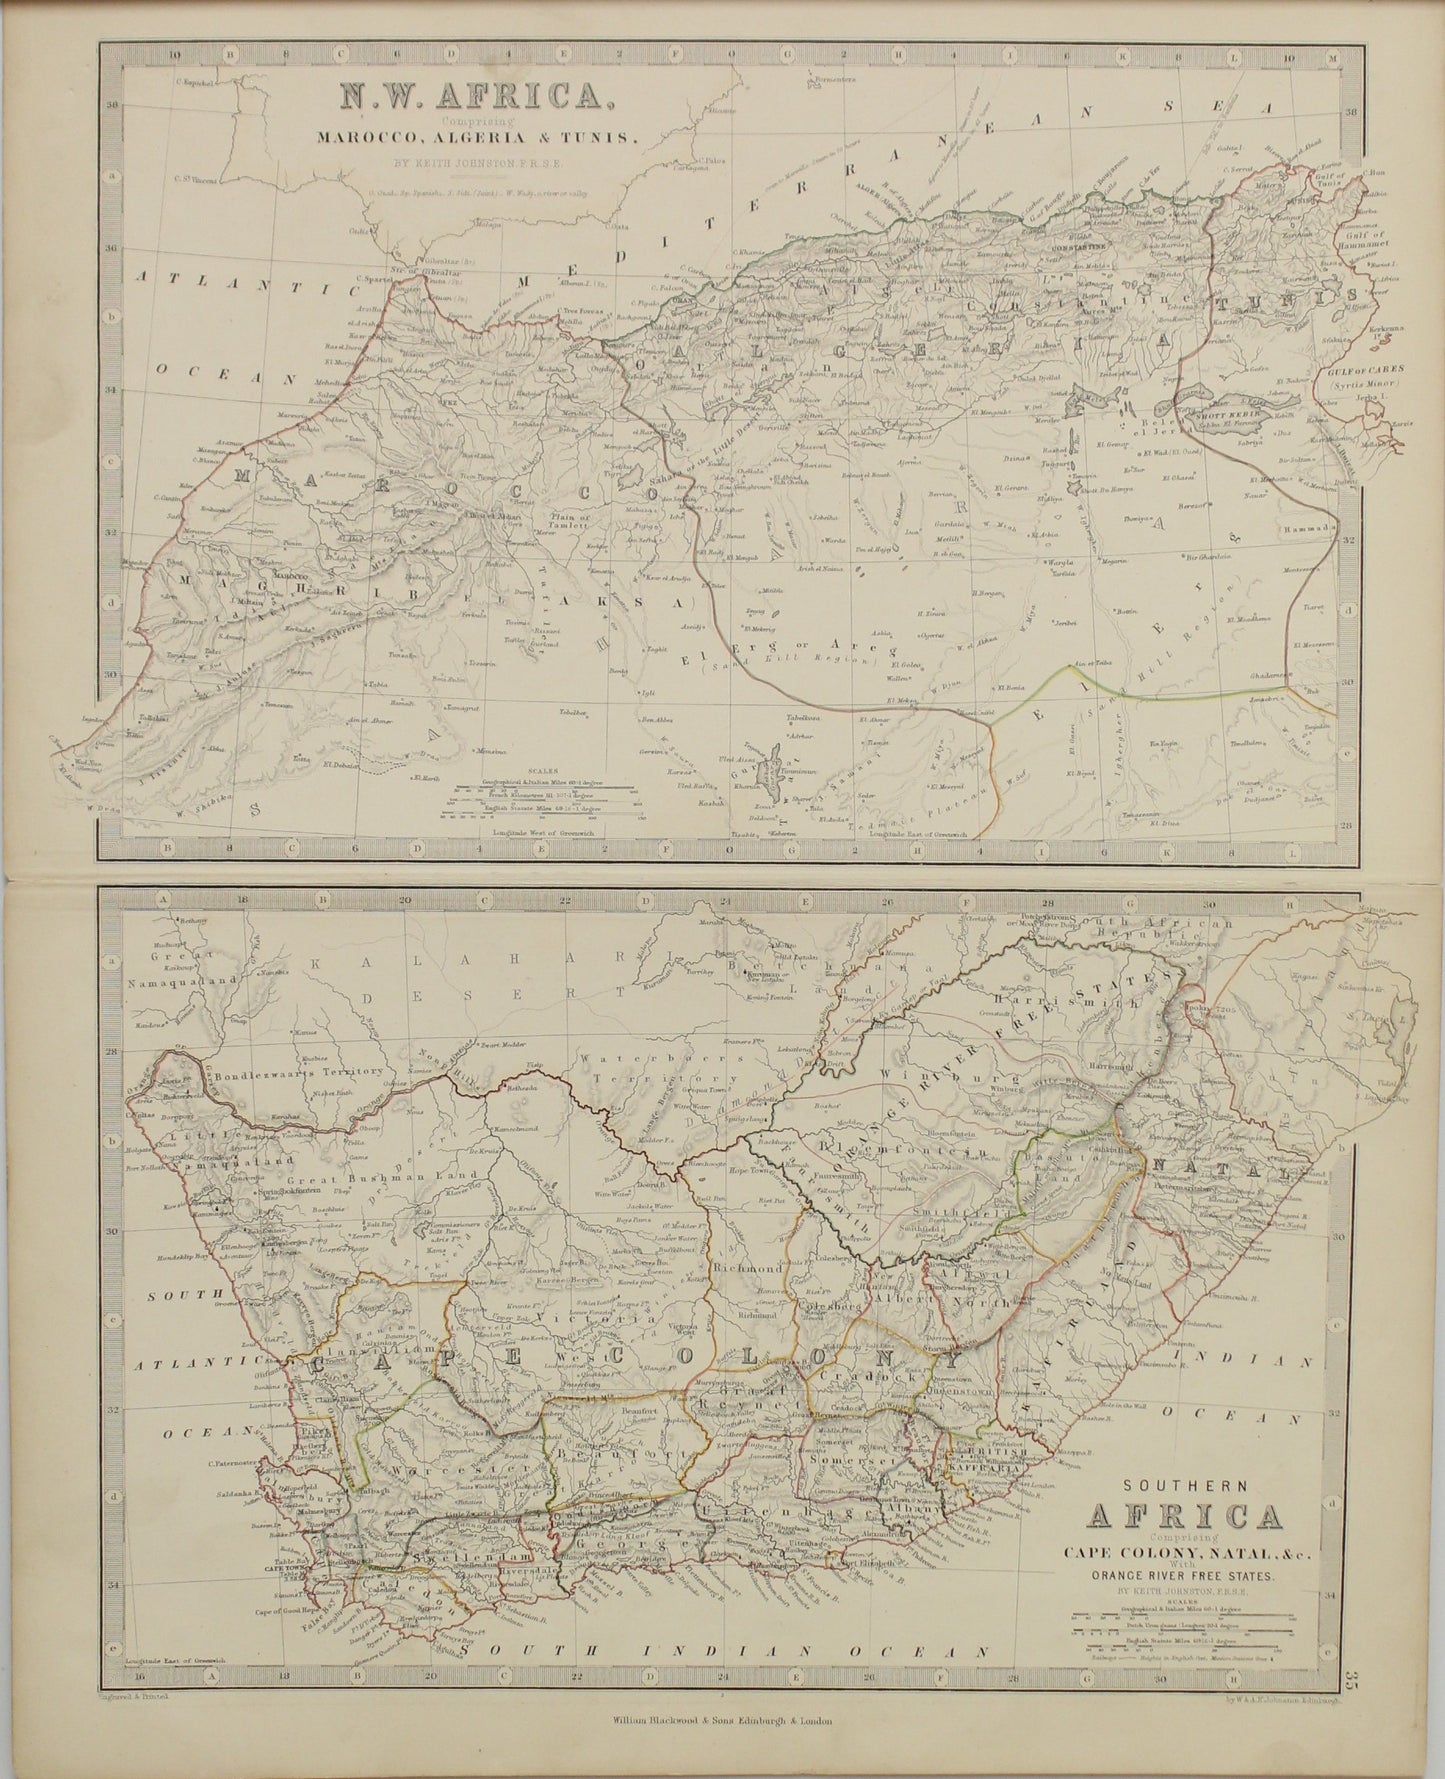 Map, William Blackwood and Sons, North West Africa, and Southern Africa, c1864